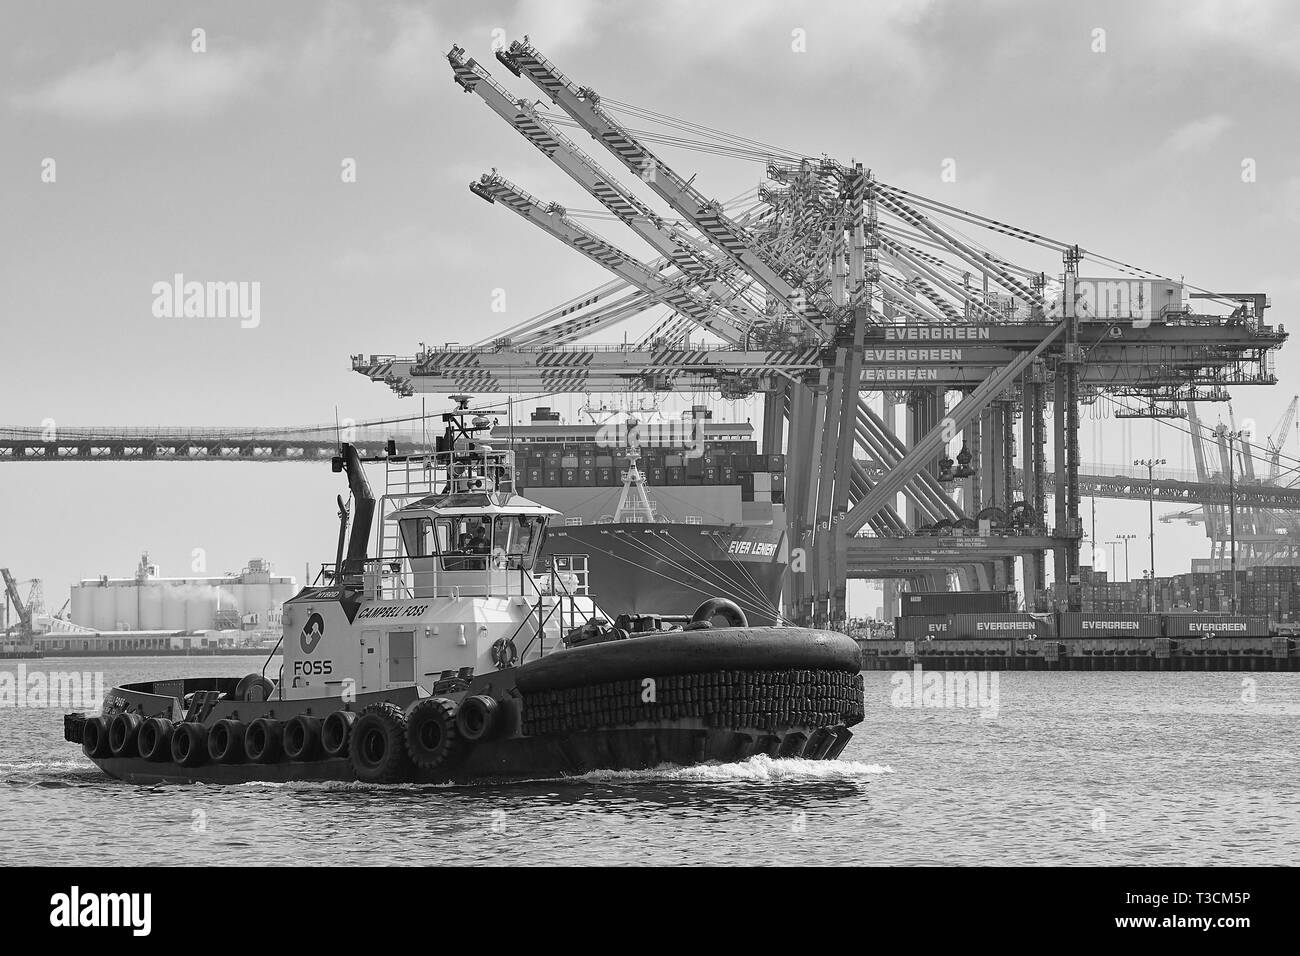 Black And White Photo Of The FOSS MARITIME Hybrid Tug CAMPBELL FOSS, Passing A Container Ship, Loading And Unloading In The Port Of Los Angeles, USA Stock Photo